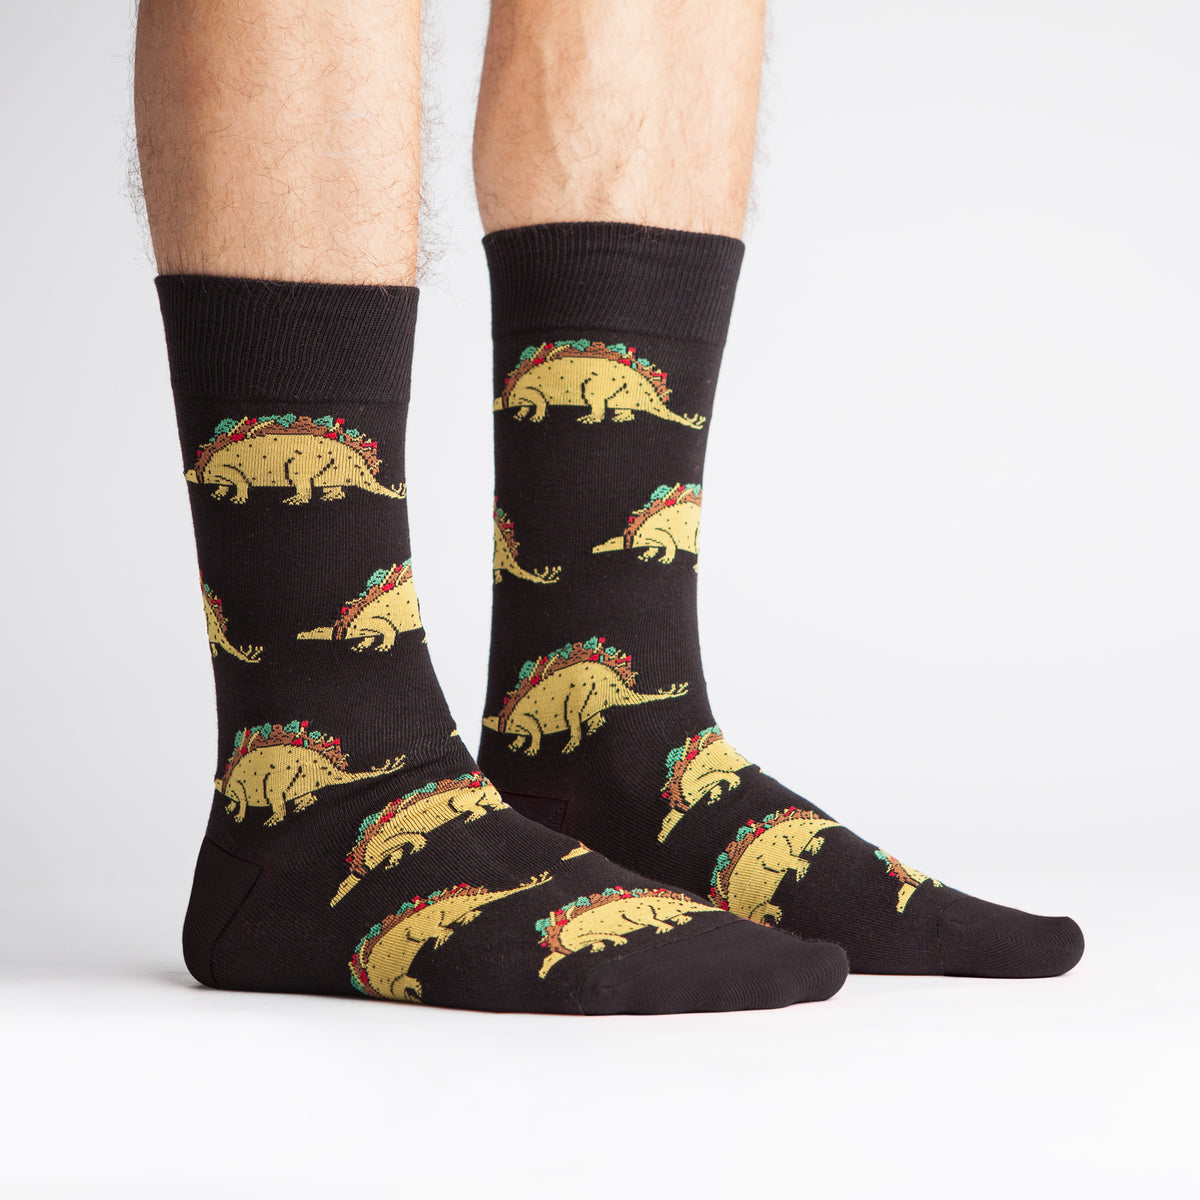 Sock It To Me black men&#39;s crew sock Tacosaurus featuring taco-dinosaurs all over worn by model seen from side